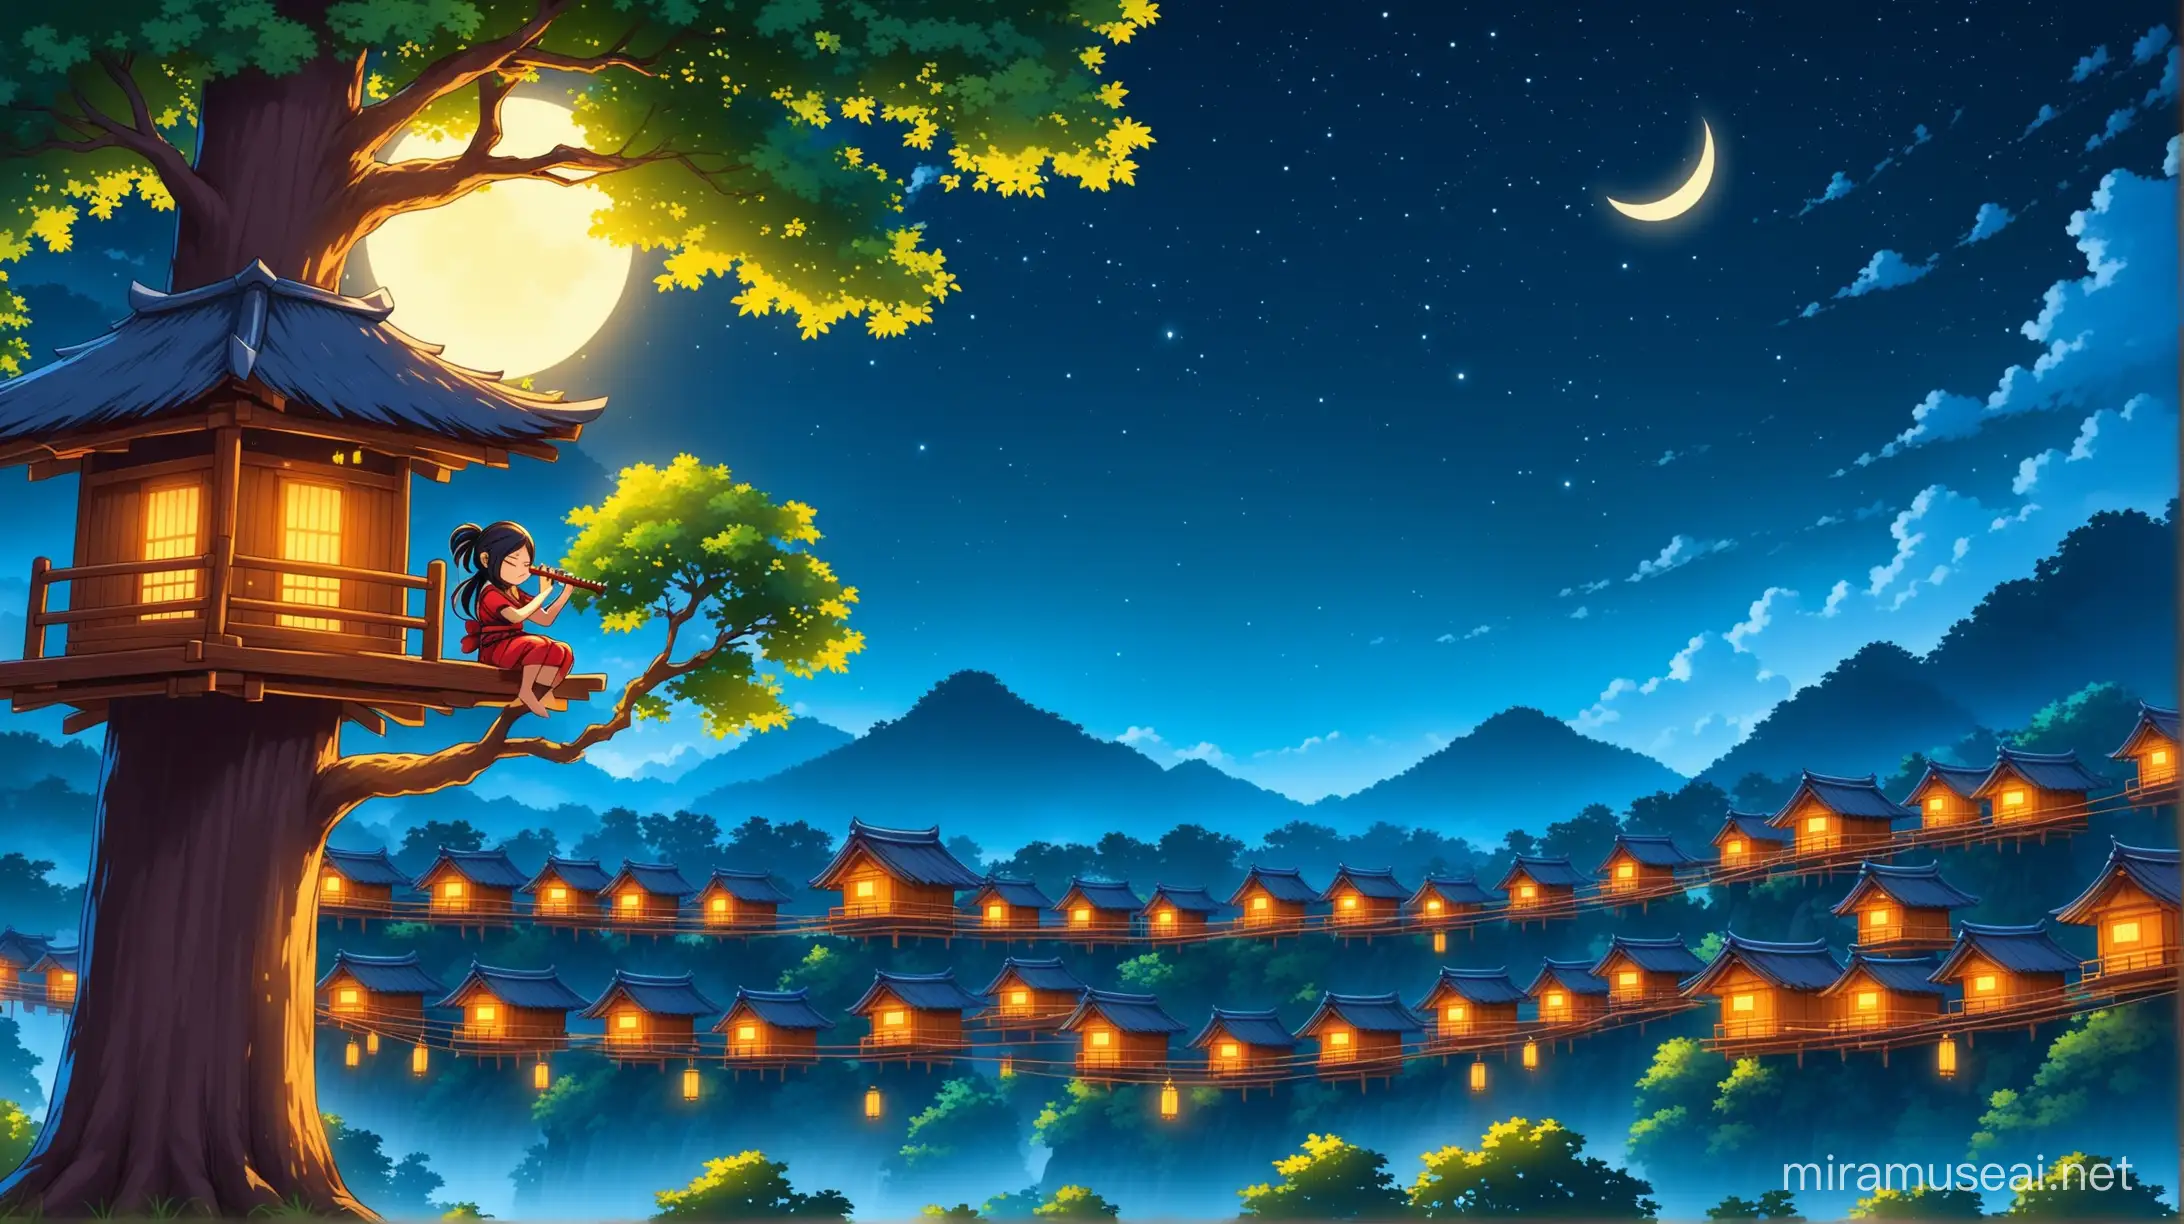 Ninja village in night all are sleeping one alone girl sitting on highest tree on village and playing flute